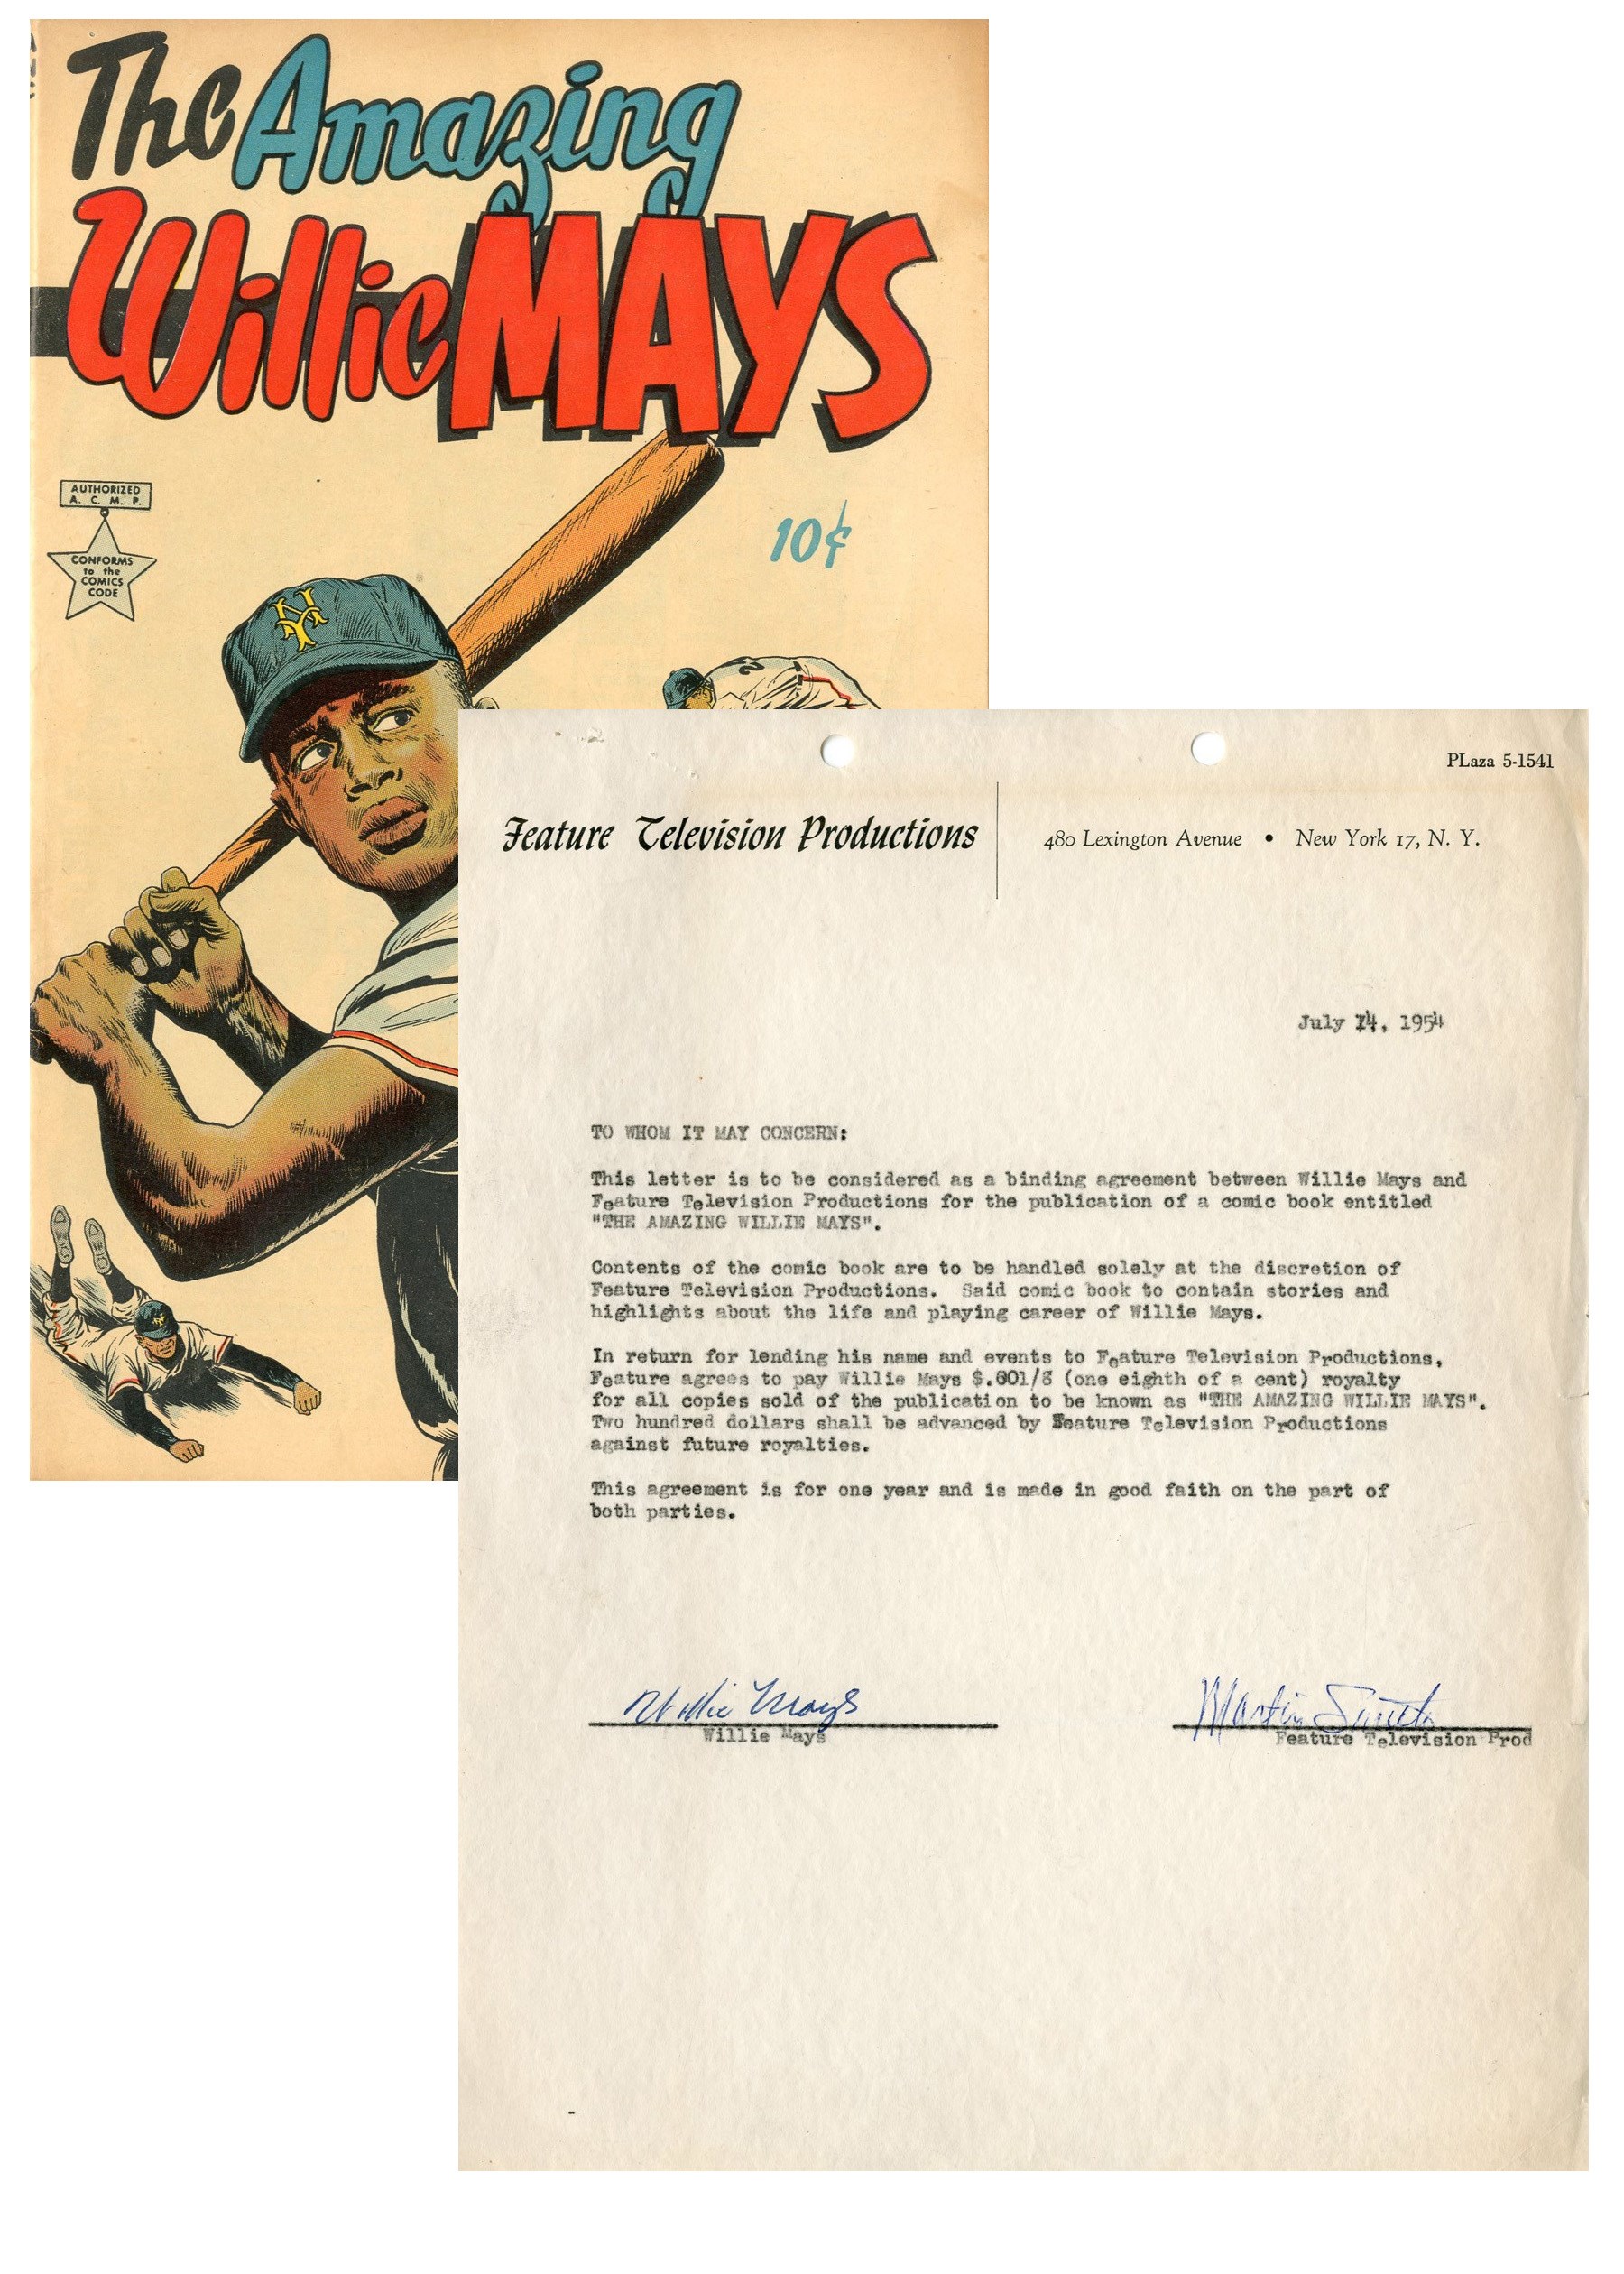 - 1954 Willie Mays Signed "The Amazing Willie Mays" Comic Book Contract (PSA)